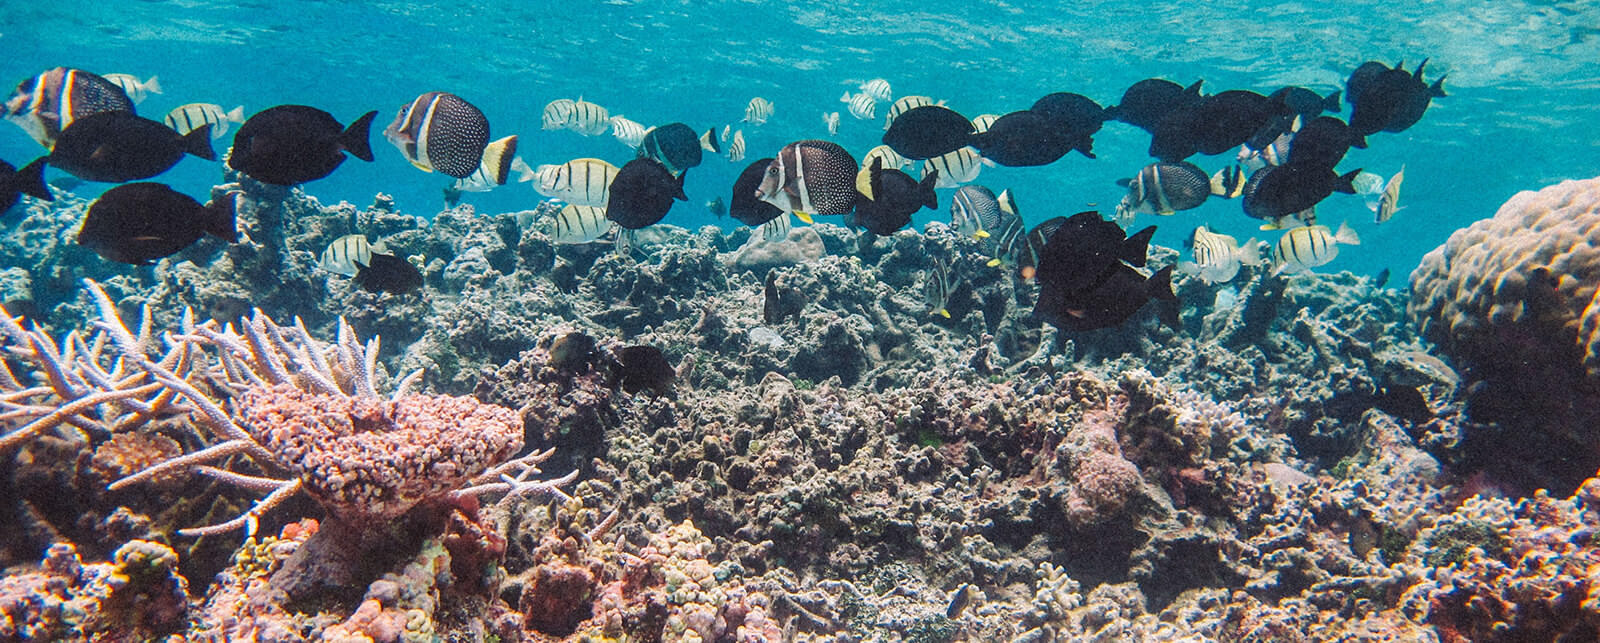 Fish in a coral reef